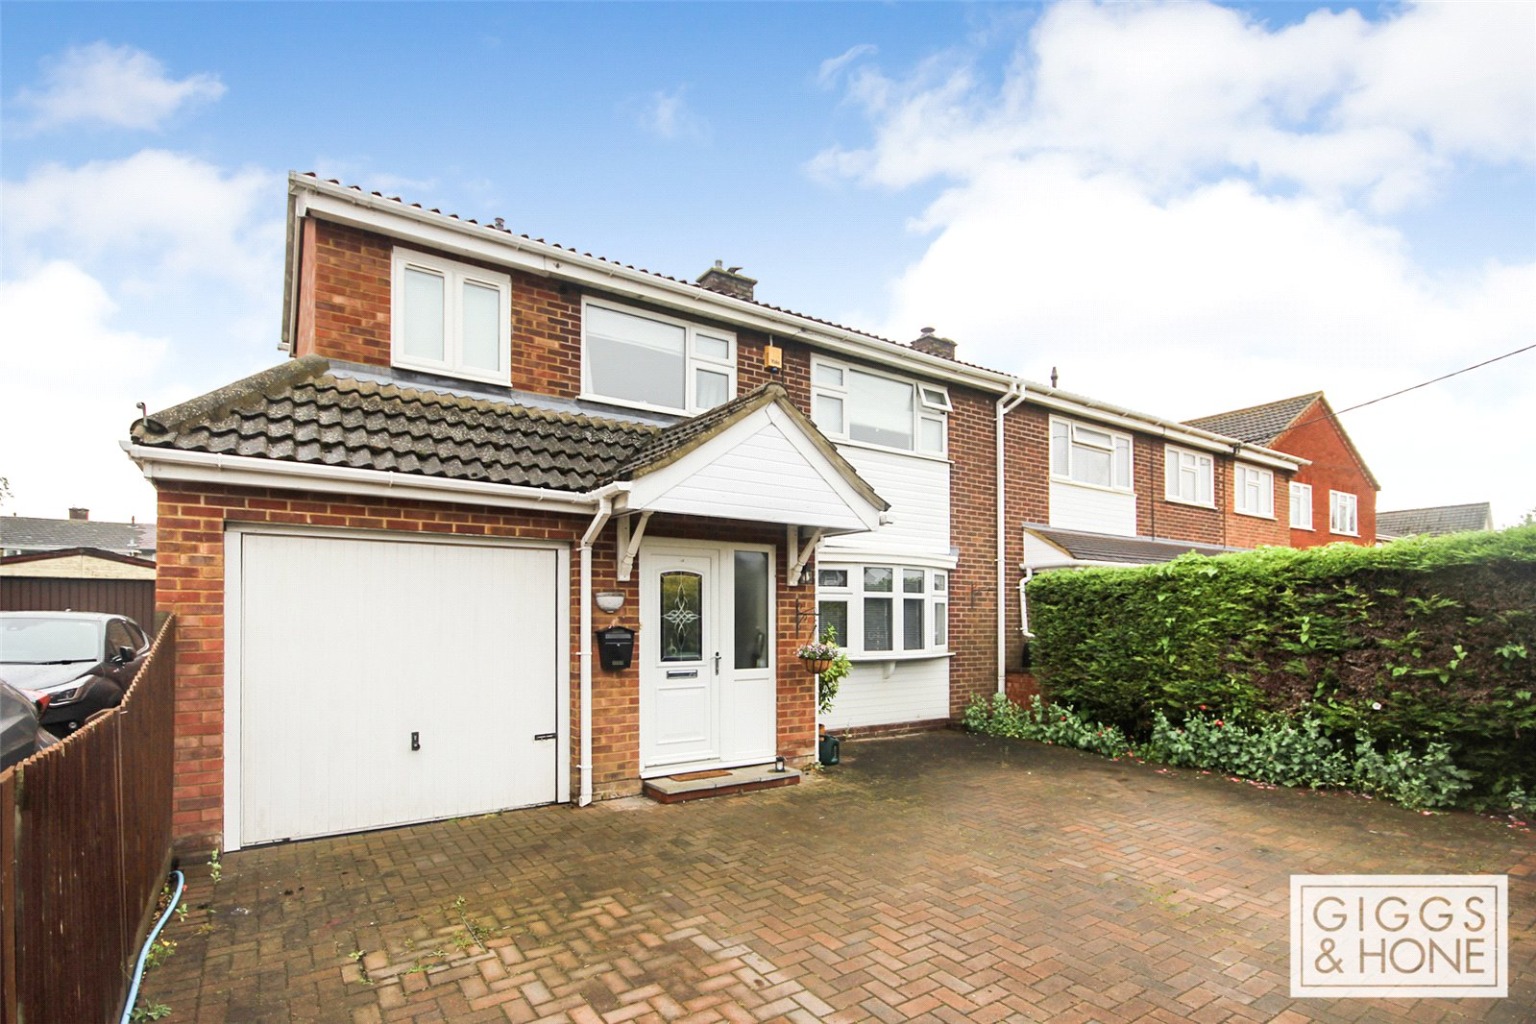 3 bed semi-detached house for sale in Crane Way, Bedford - Property Image 1